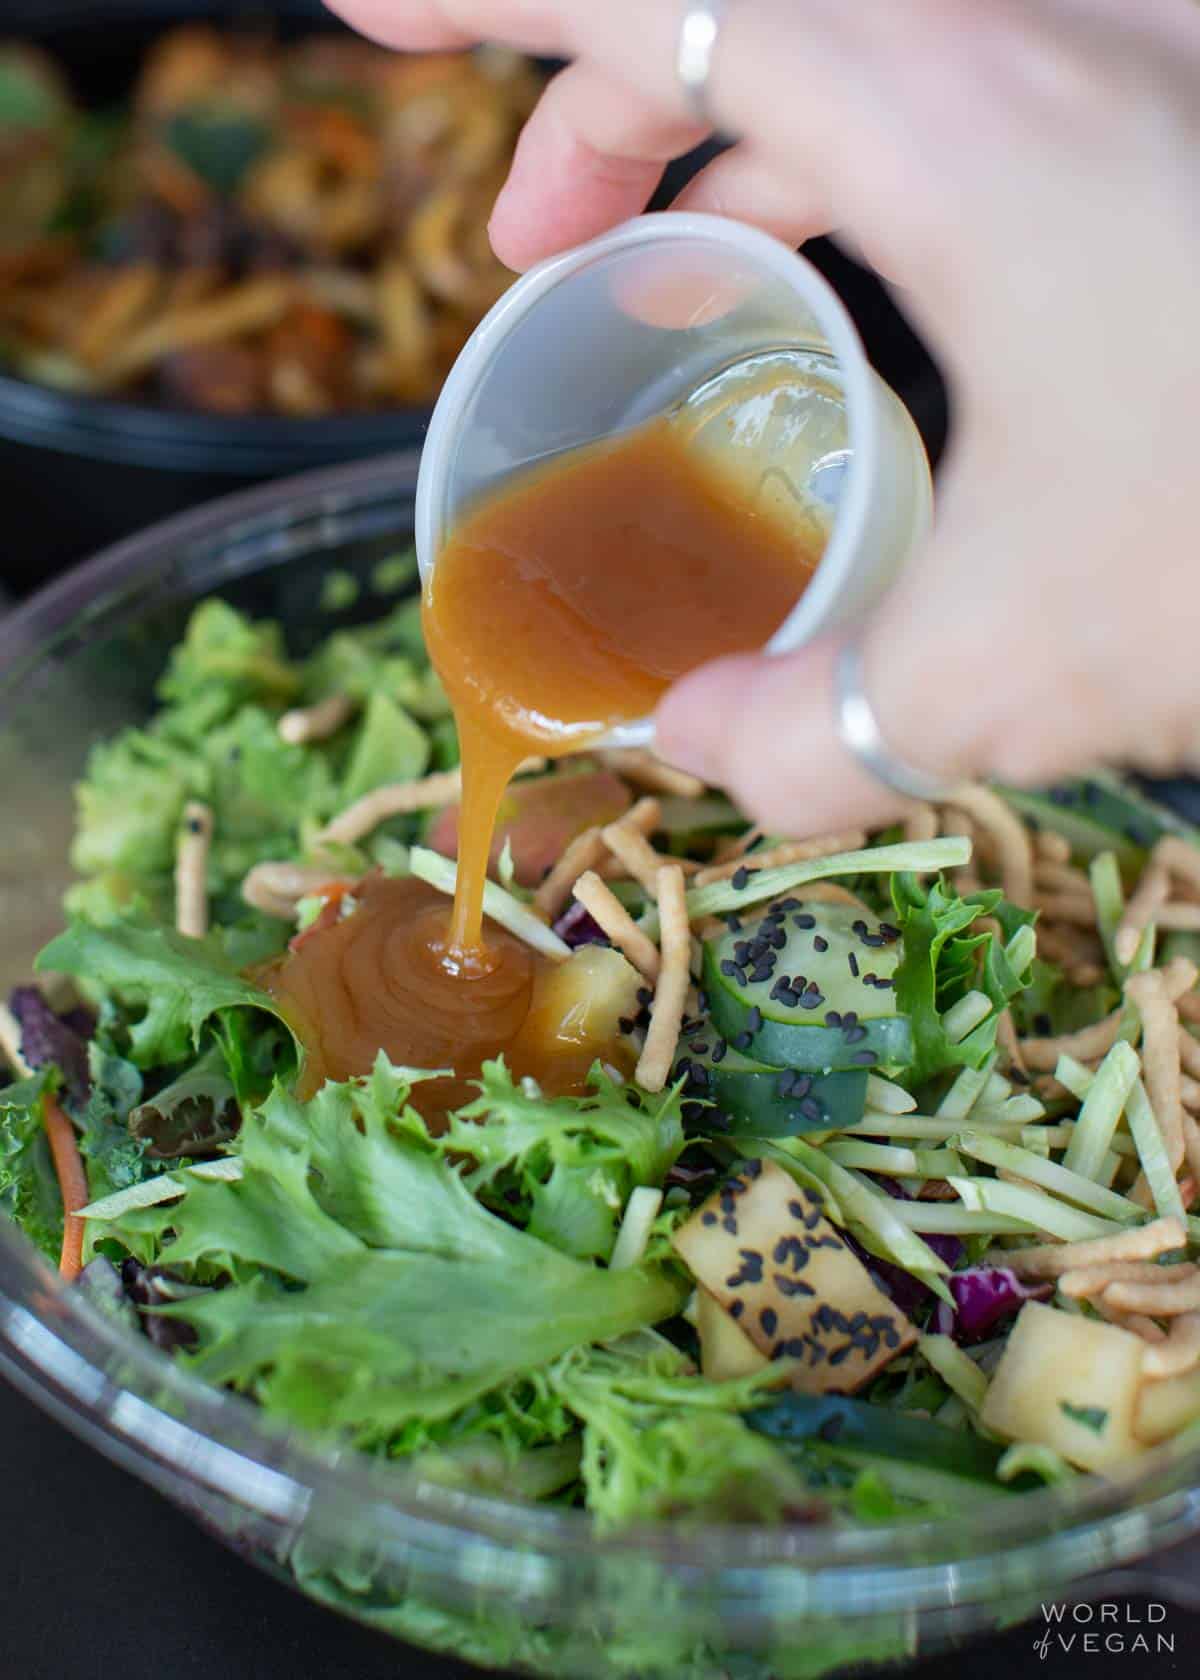 pouring dressing over the vegan asian salad at noodles and company